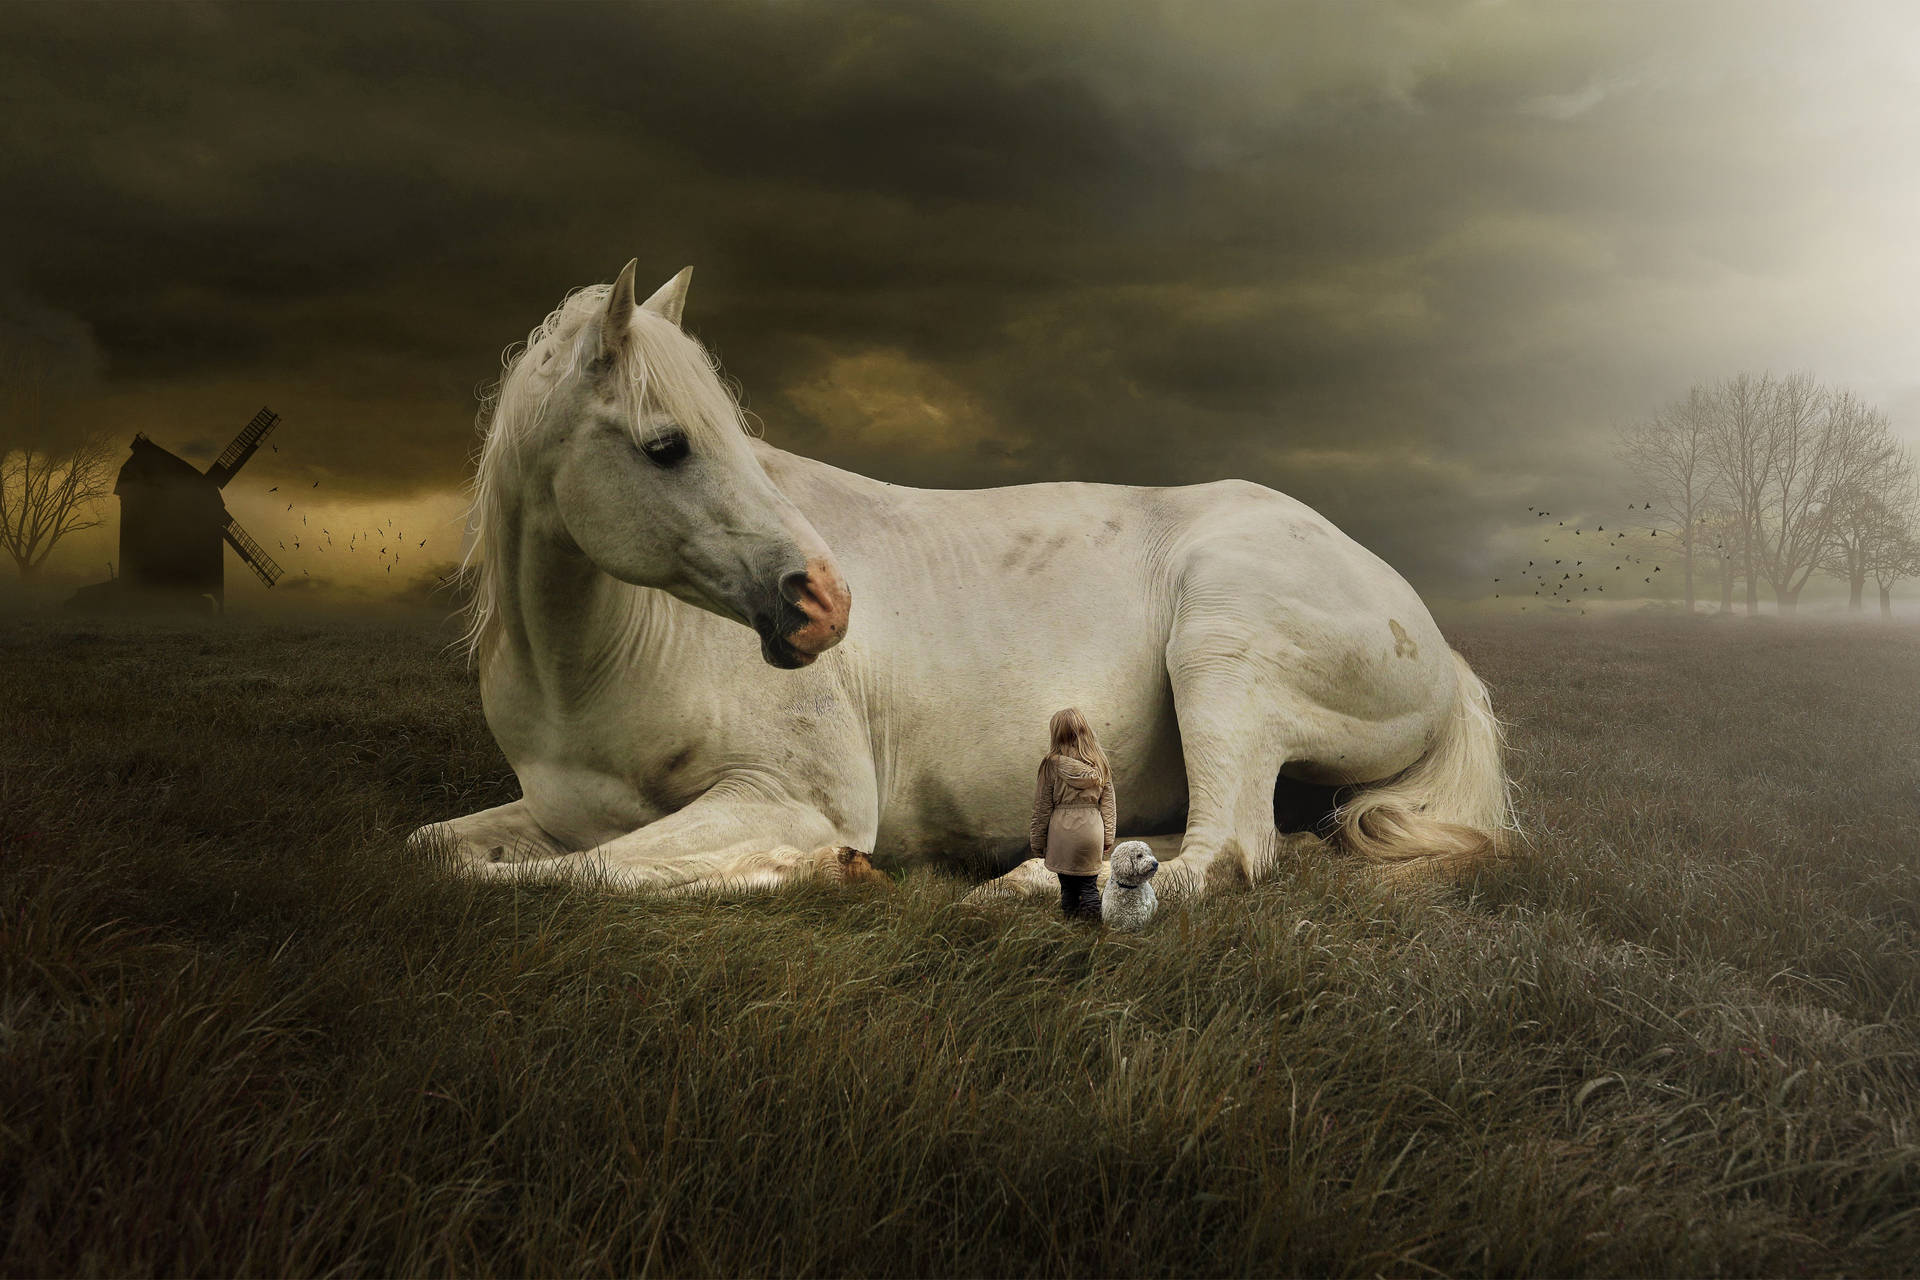 Giant Cute Horse With Girl And Puppy Background